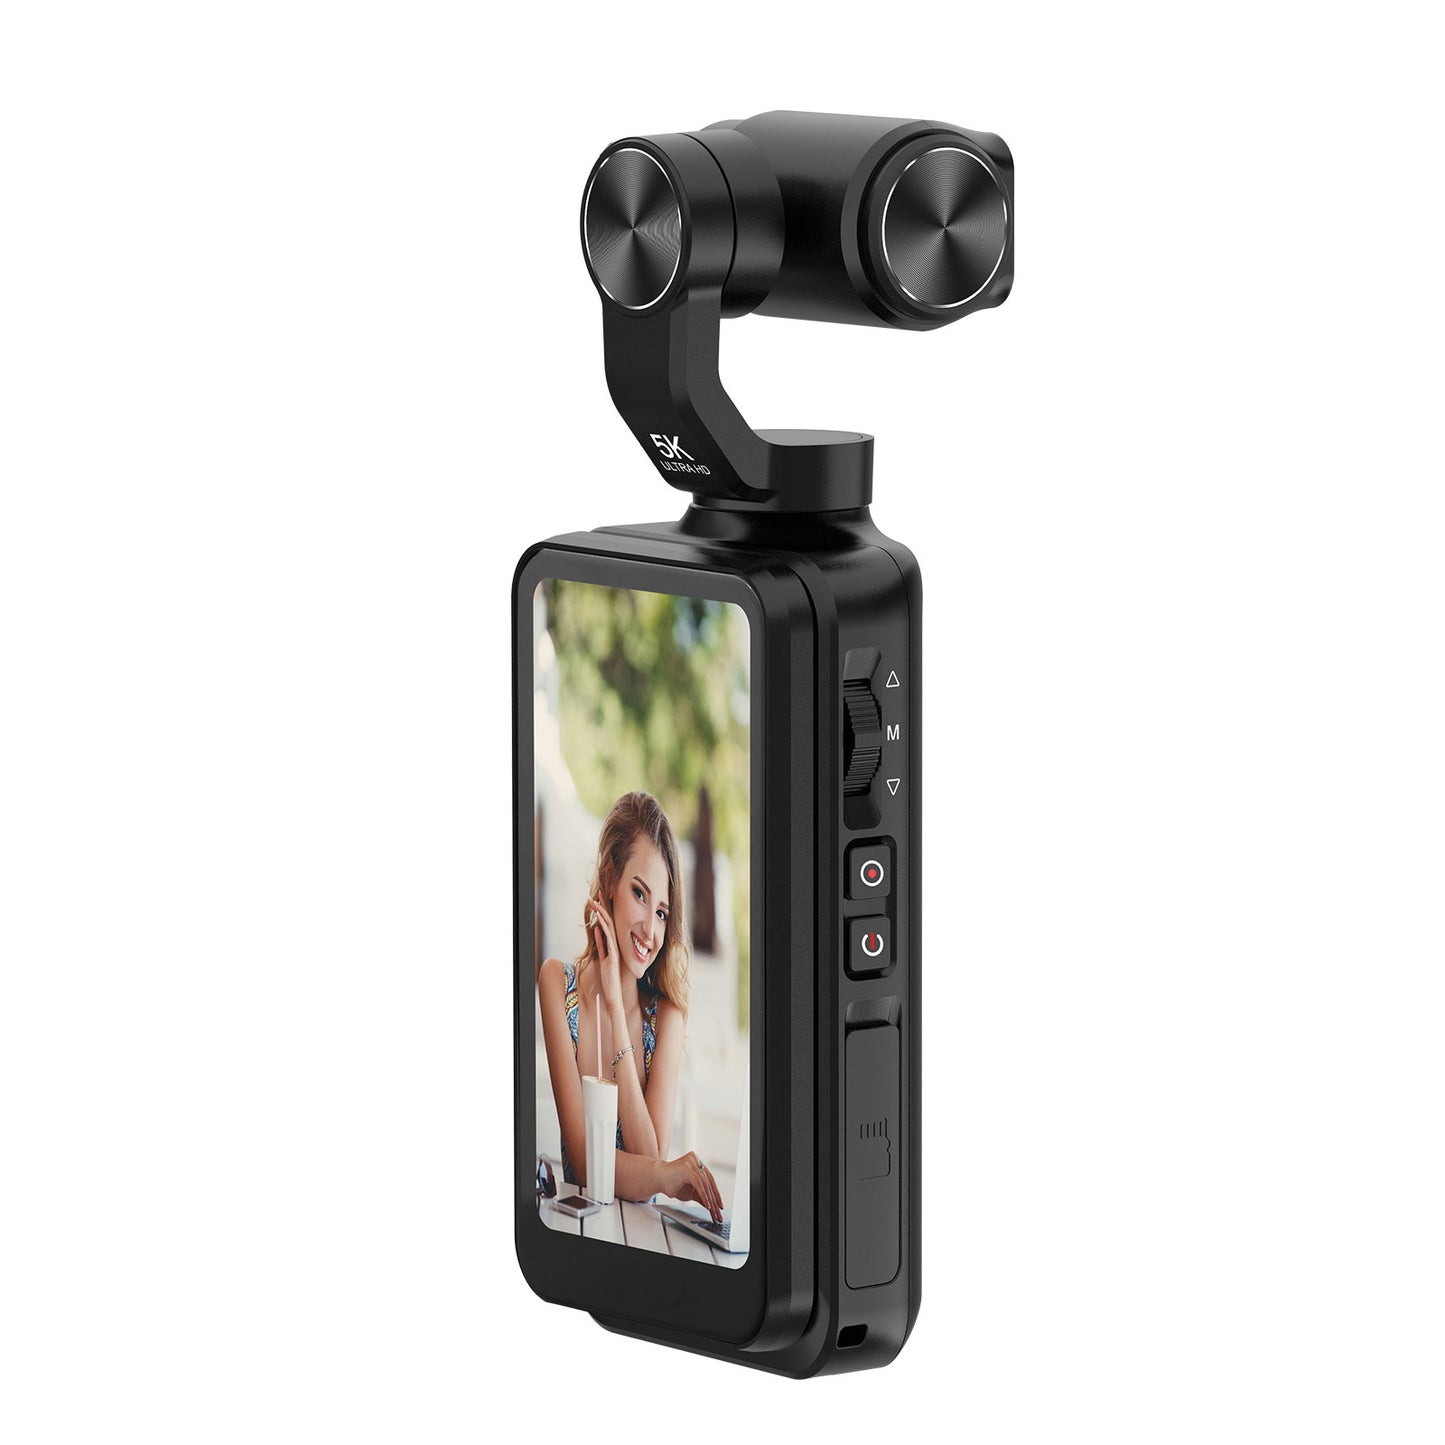 The Bigly Brothers Nimble 1 World largest Pocket Camera Screen 3.5-inch vlogging Camera screen, 3-axis EIS Stabilization, 5k @30fps, 4k @60fps , AI Face tracking, IR night Vision, 120° wide-angle, 180° rotatable screen great for youtube